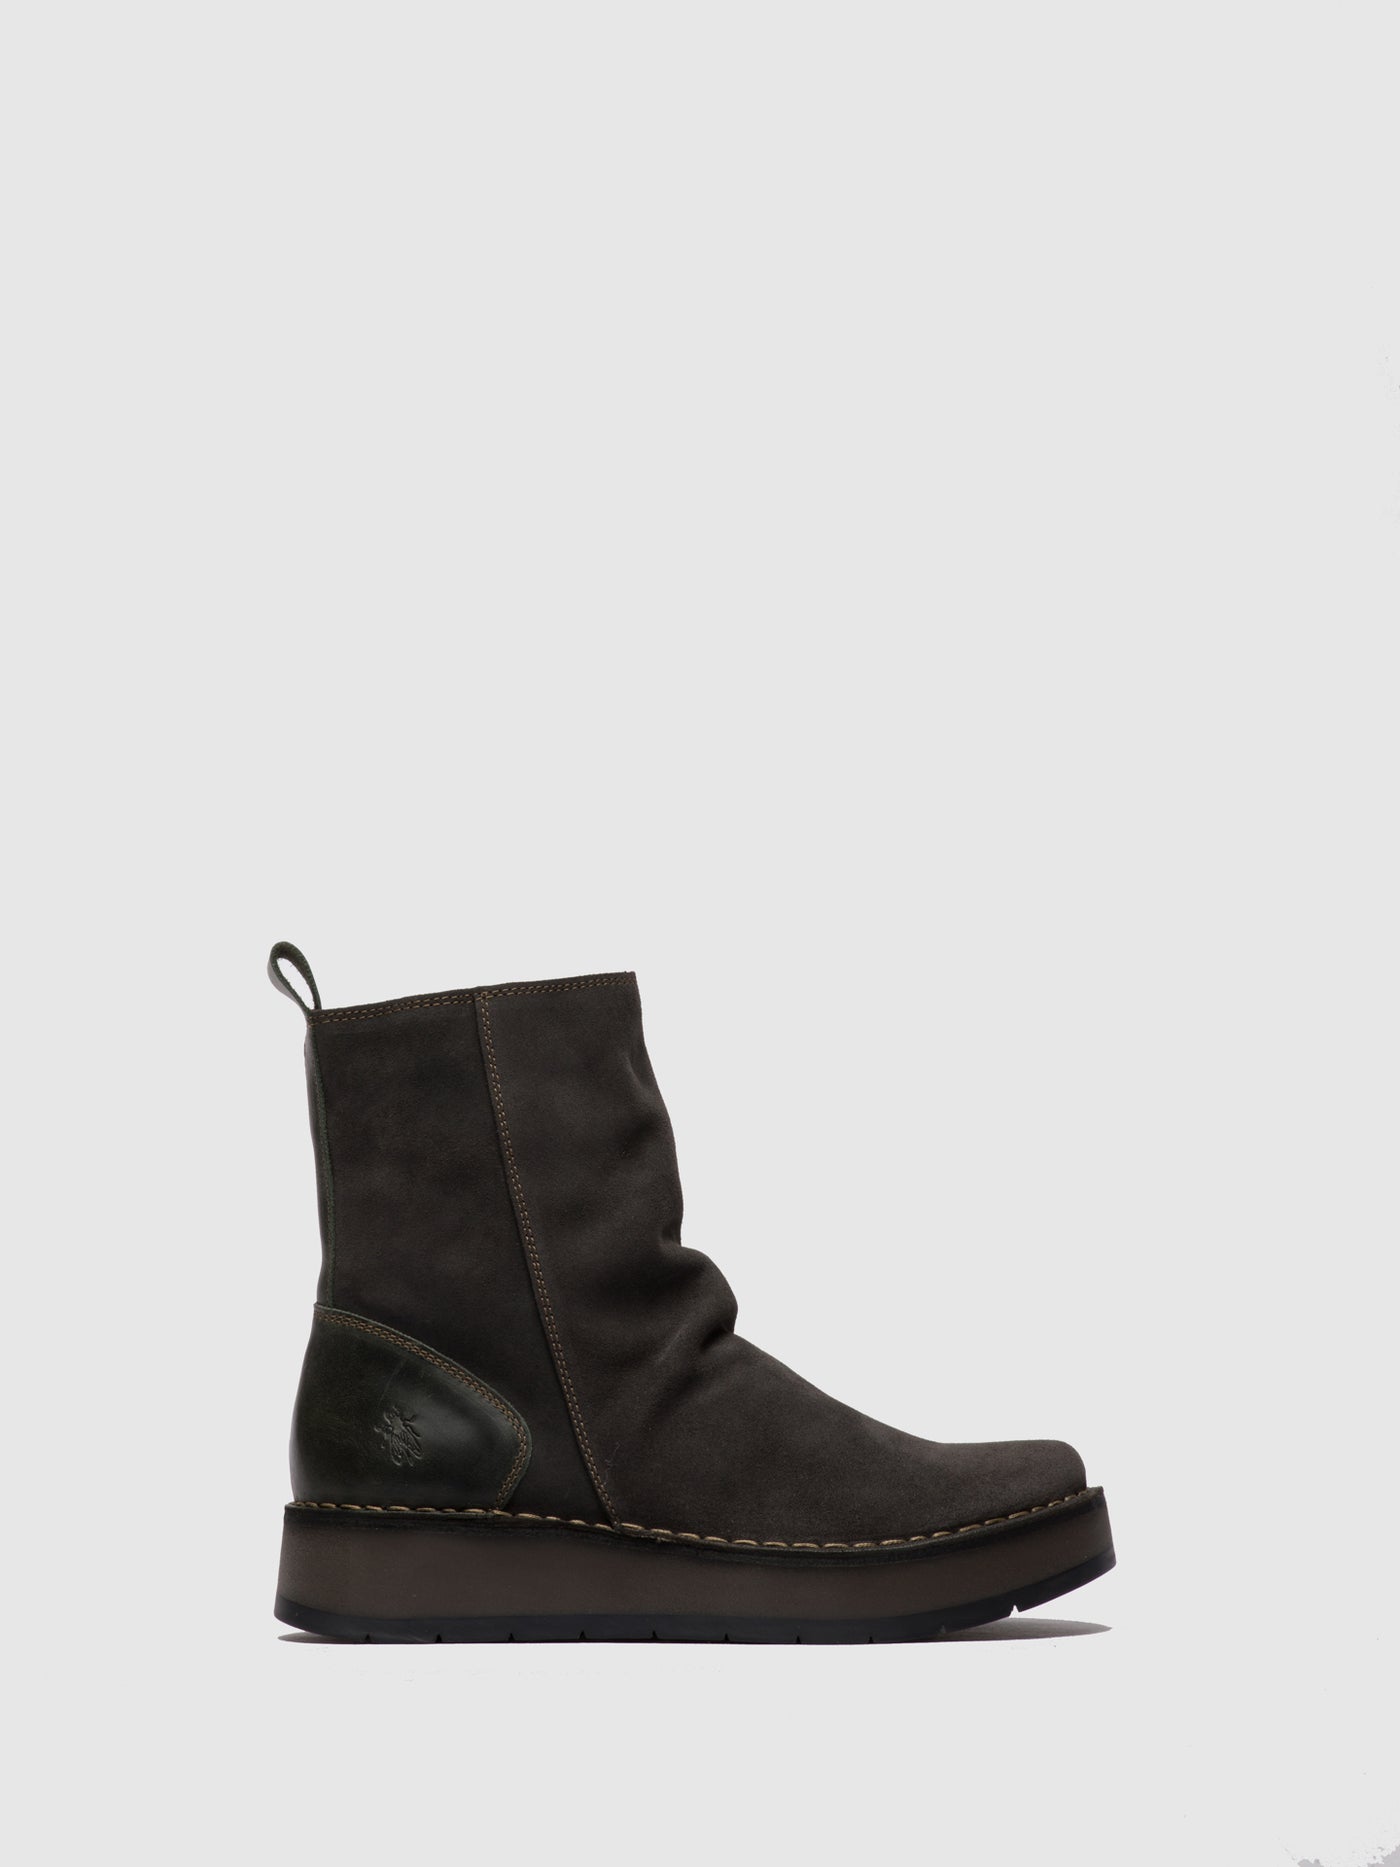 Zip Up Ankle Boots RENO053FLY OILSUEDE/RUG DIESEL